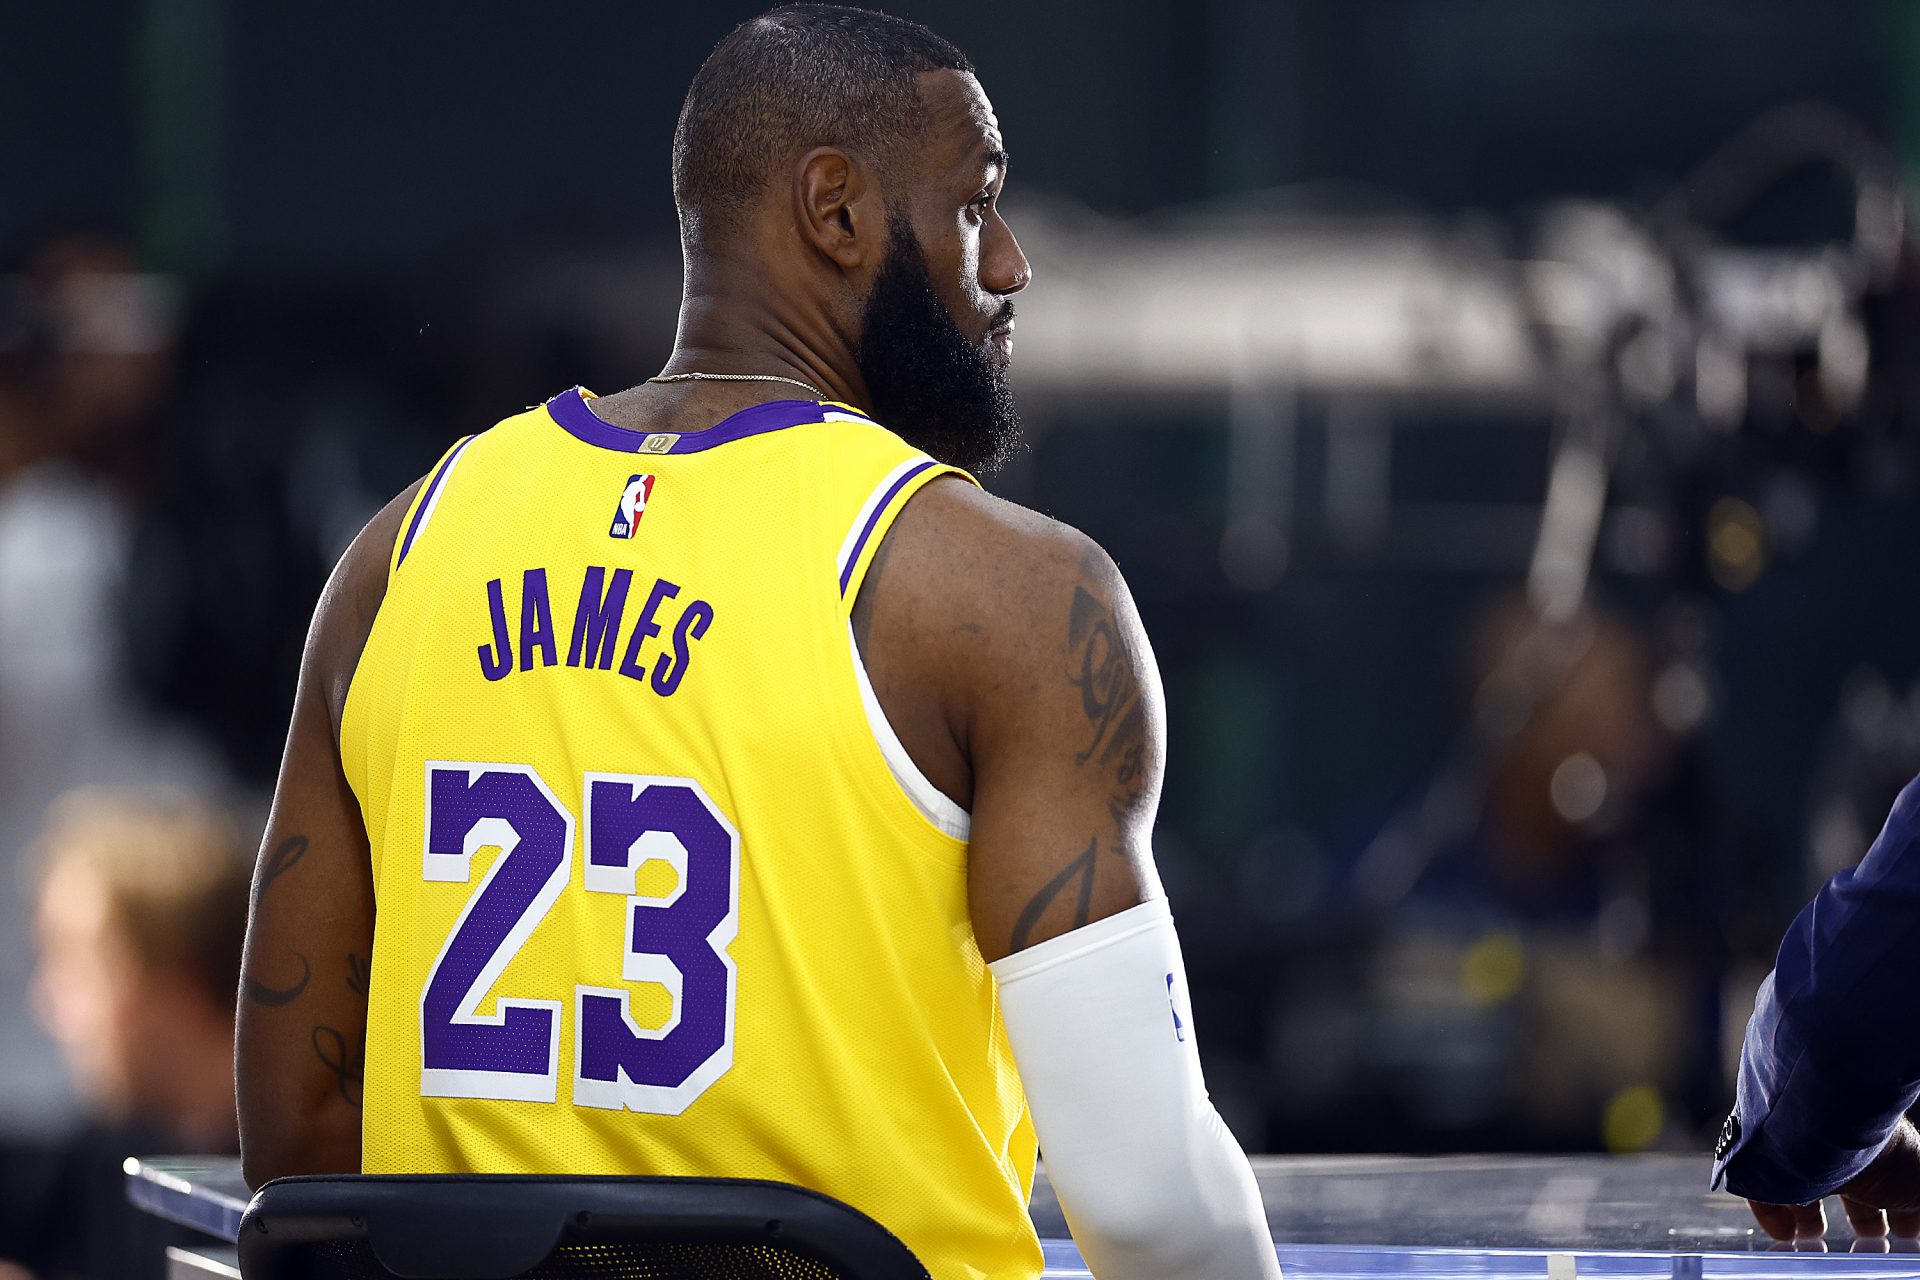 Who are the five players to have a career longer than GOAT LeBron James?